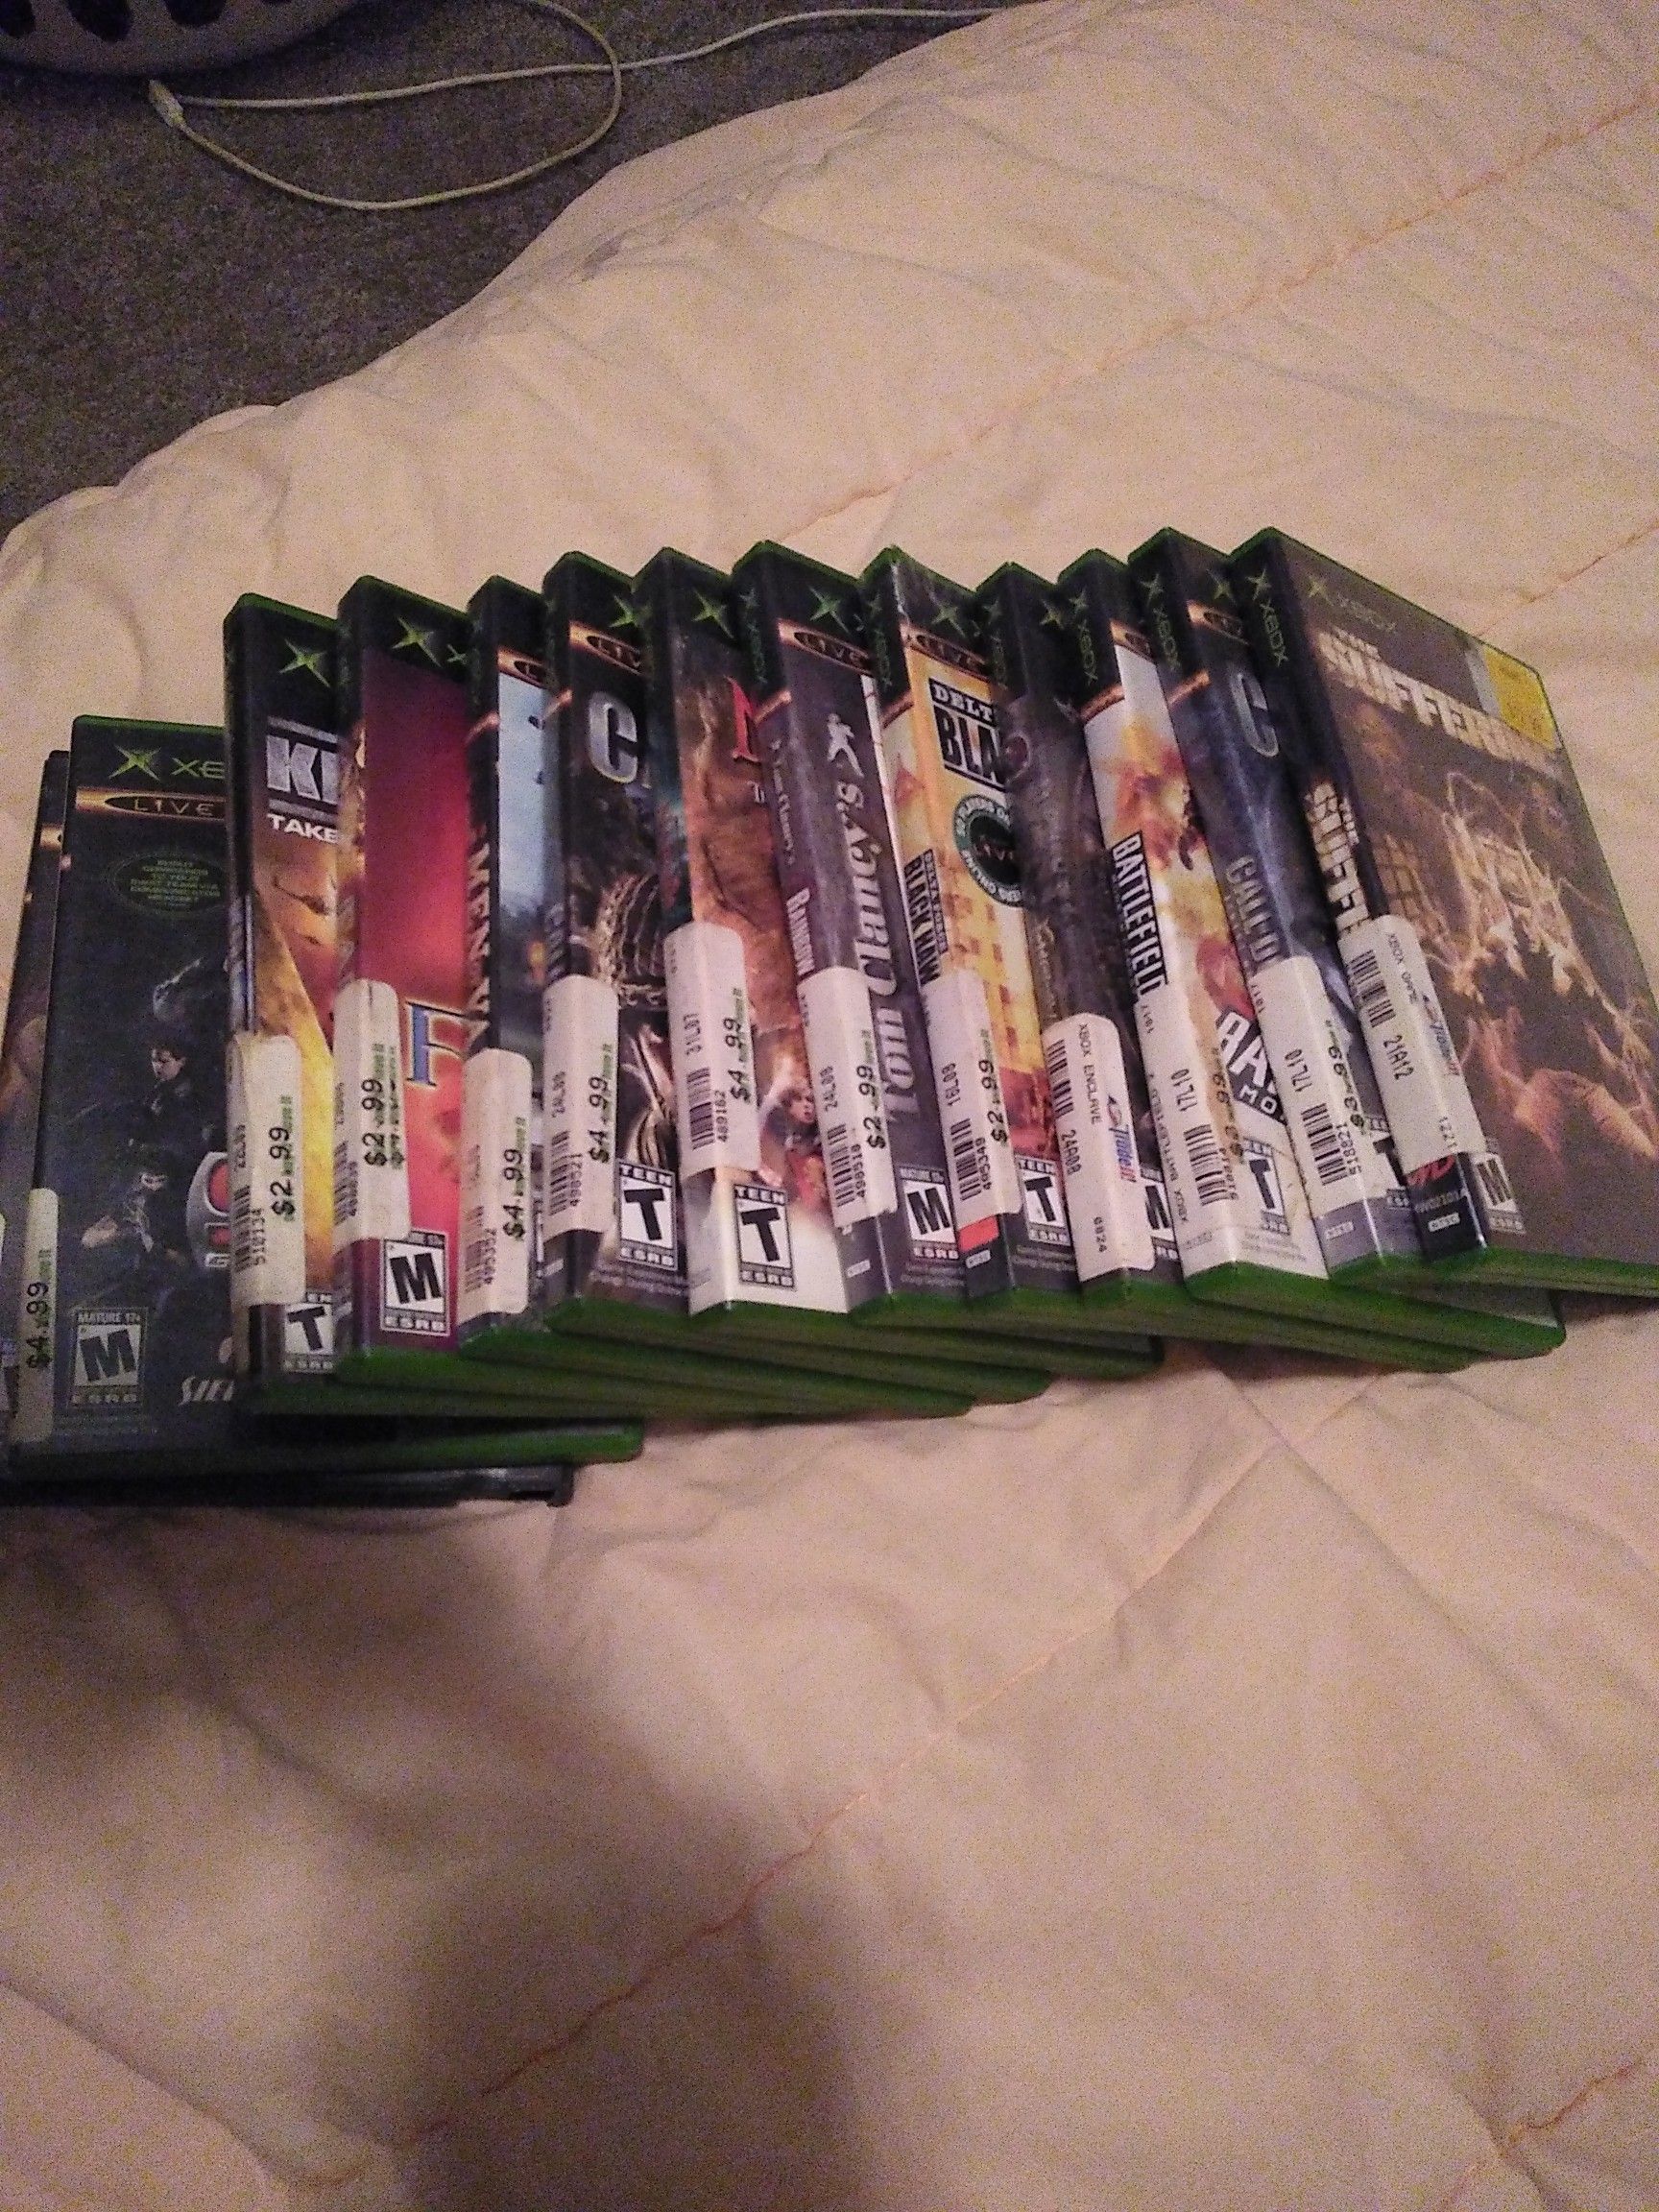 Xbox games all for $10